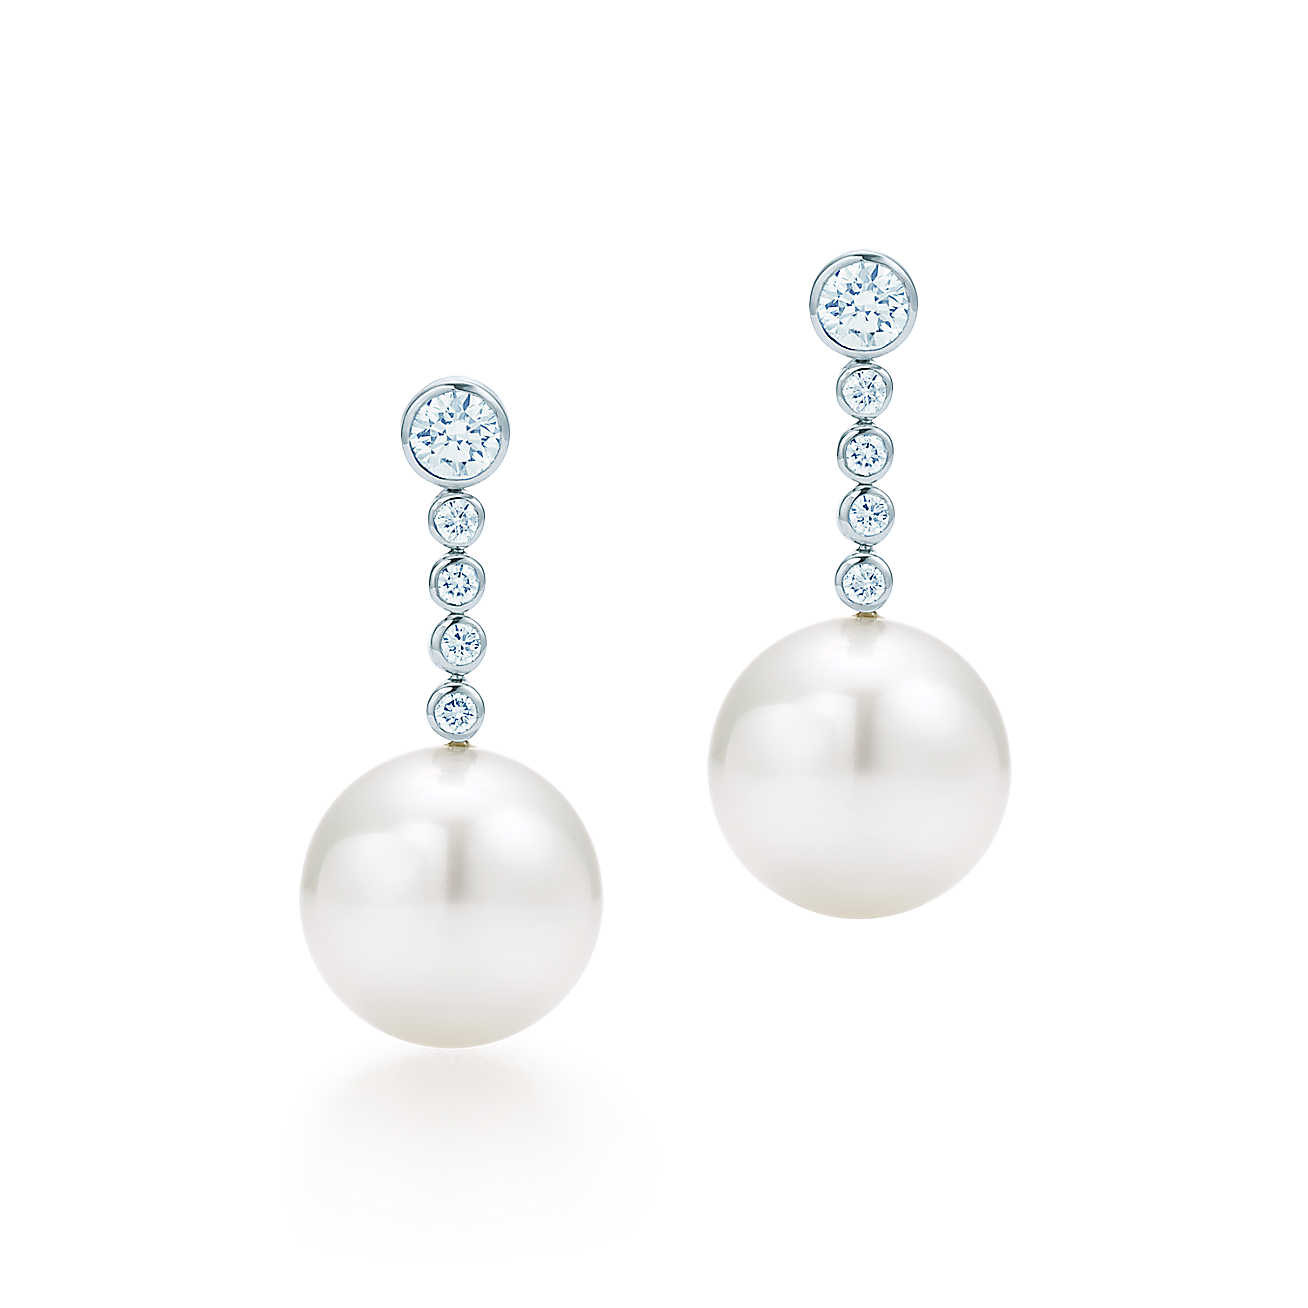 Tiffany Pearl Earrings
 Tiffany Jazz™ earrings in platinum with South Sea cultured